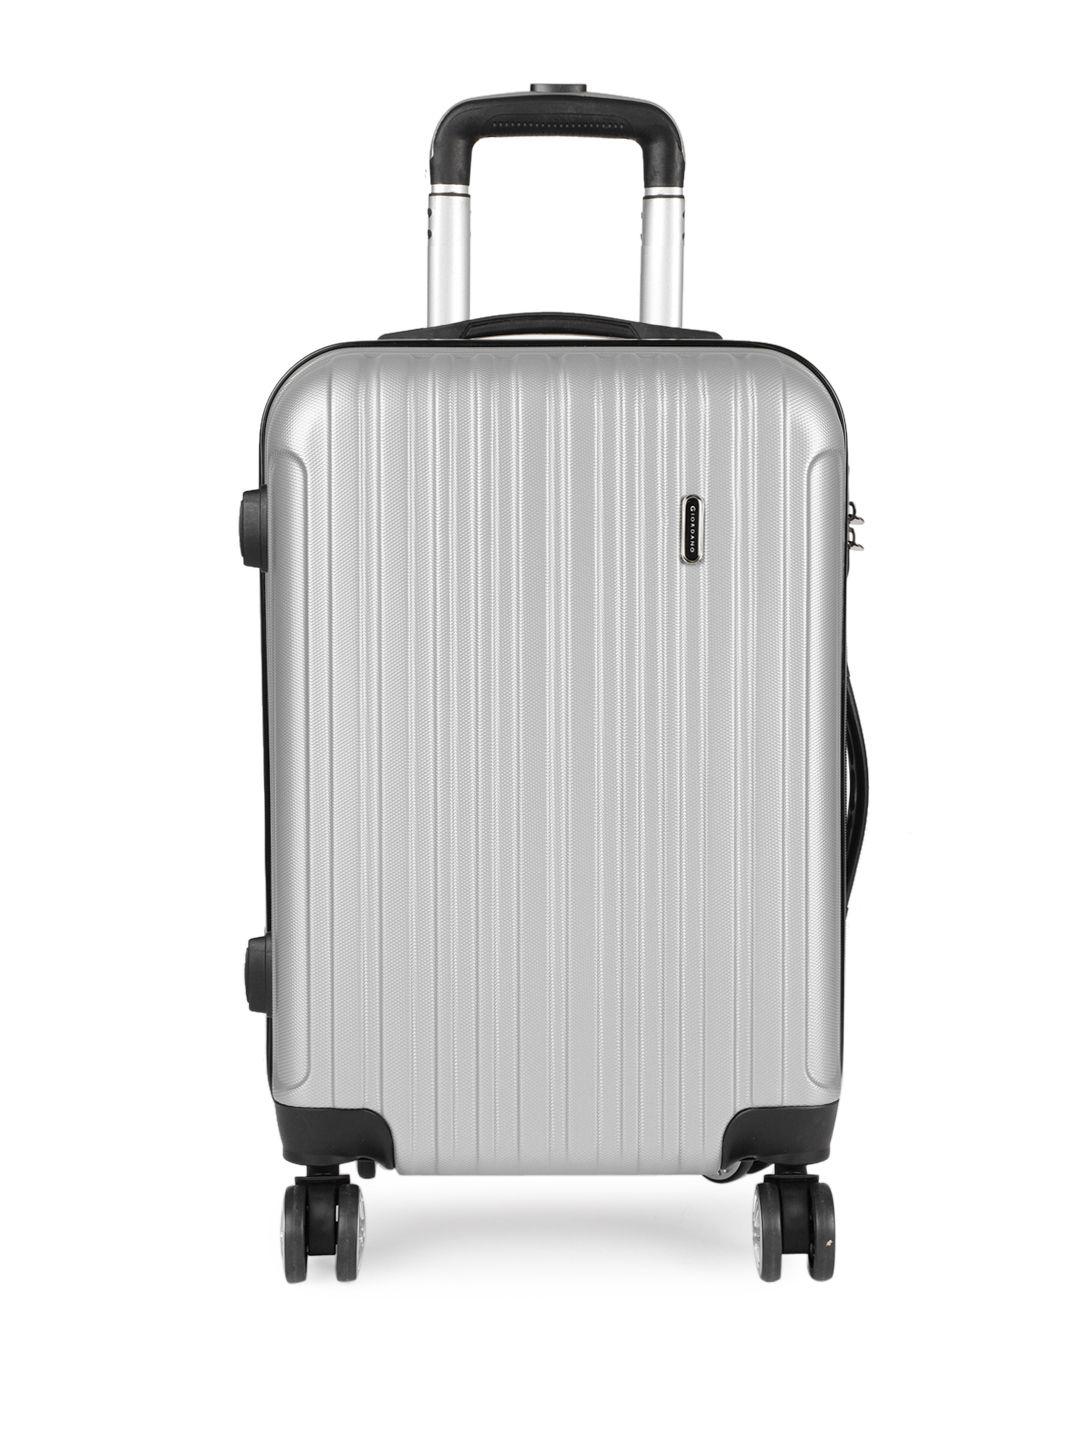 giordano unisex silver-toned cabin trolley suitcase